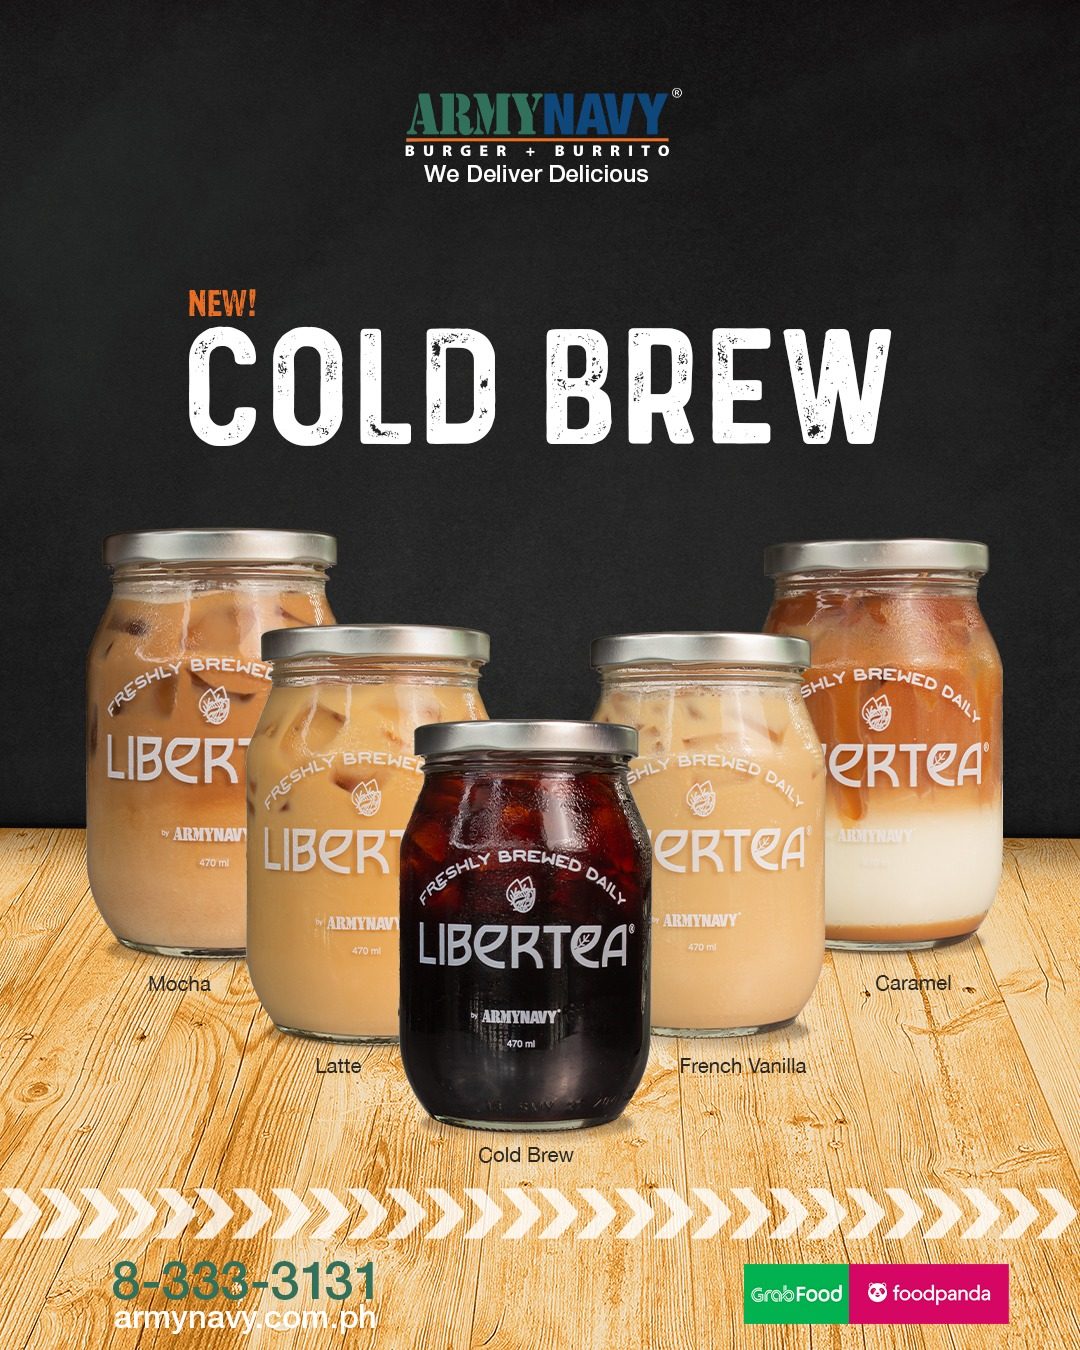 Army Navy launches new iced coffee line-up